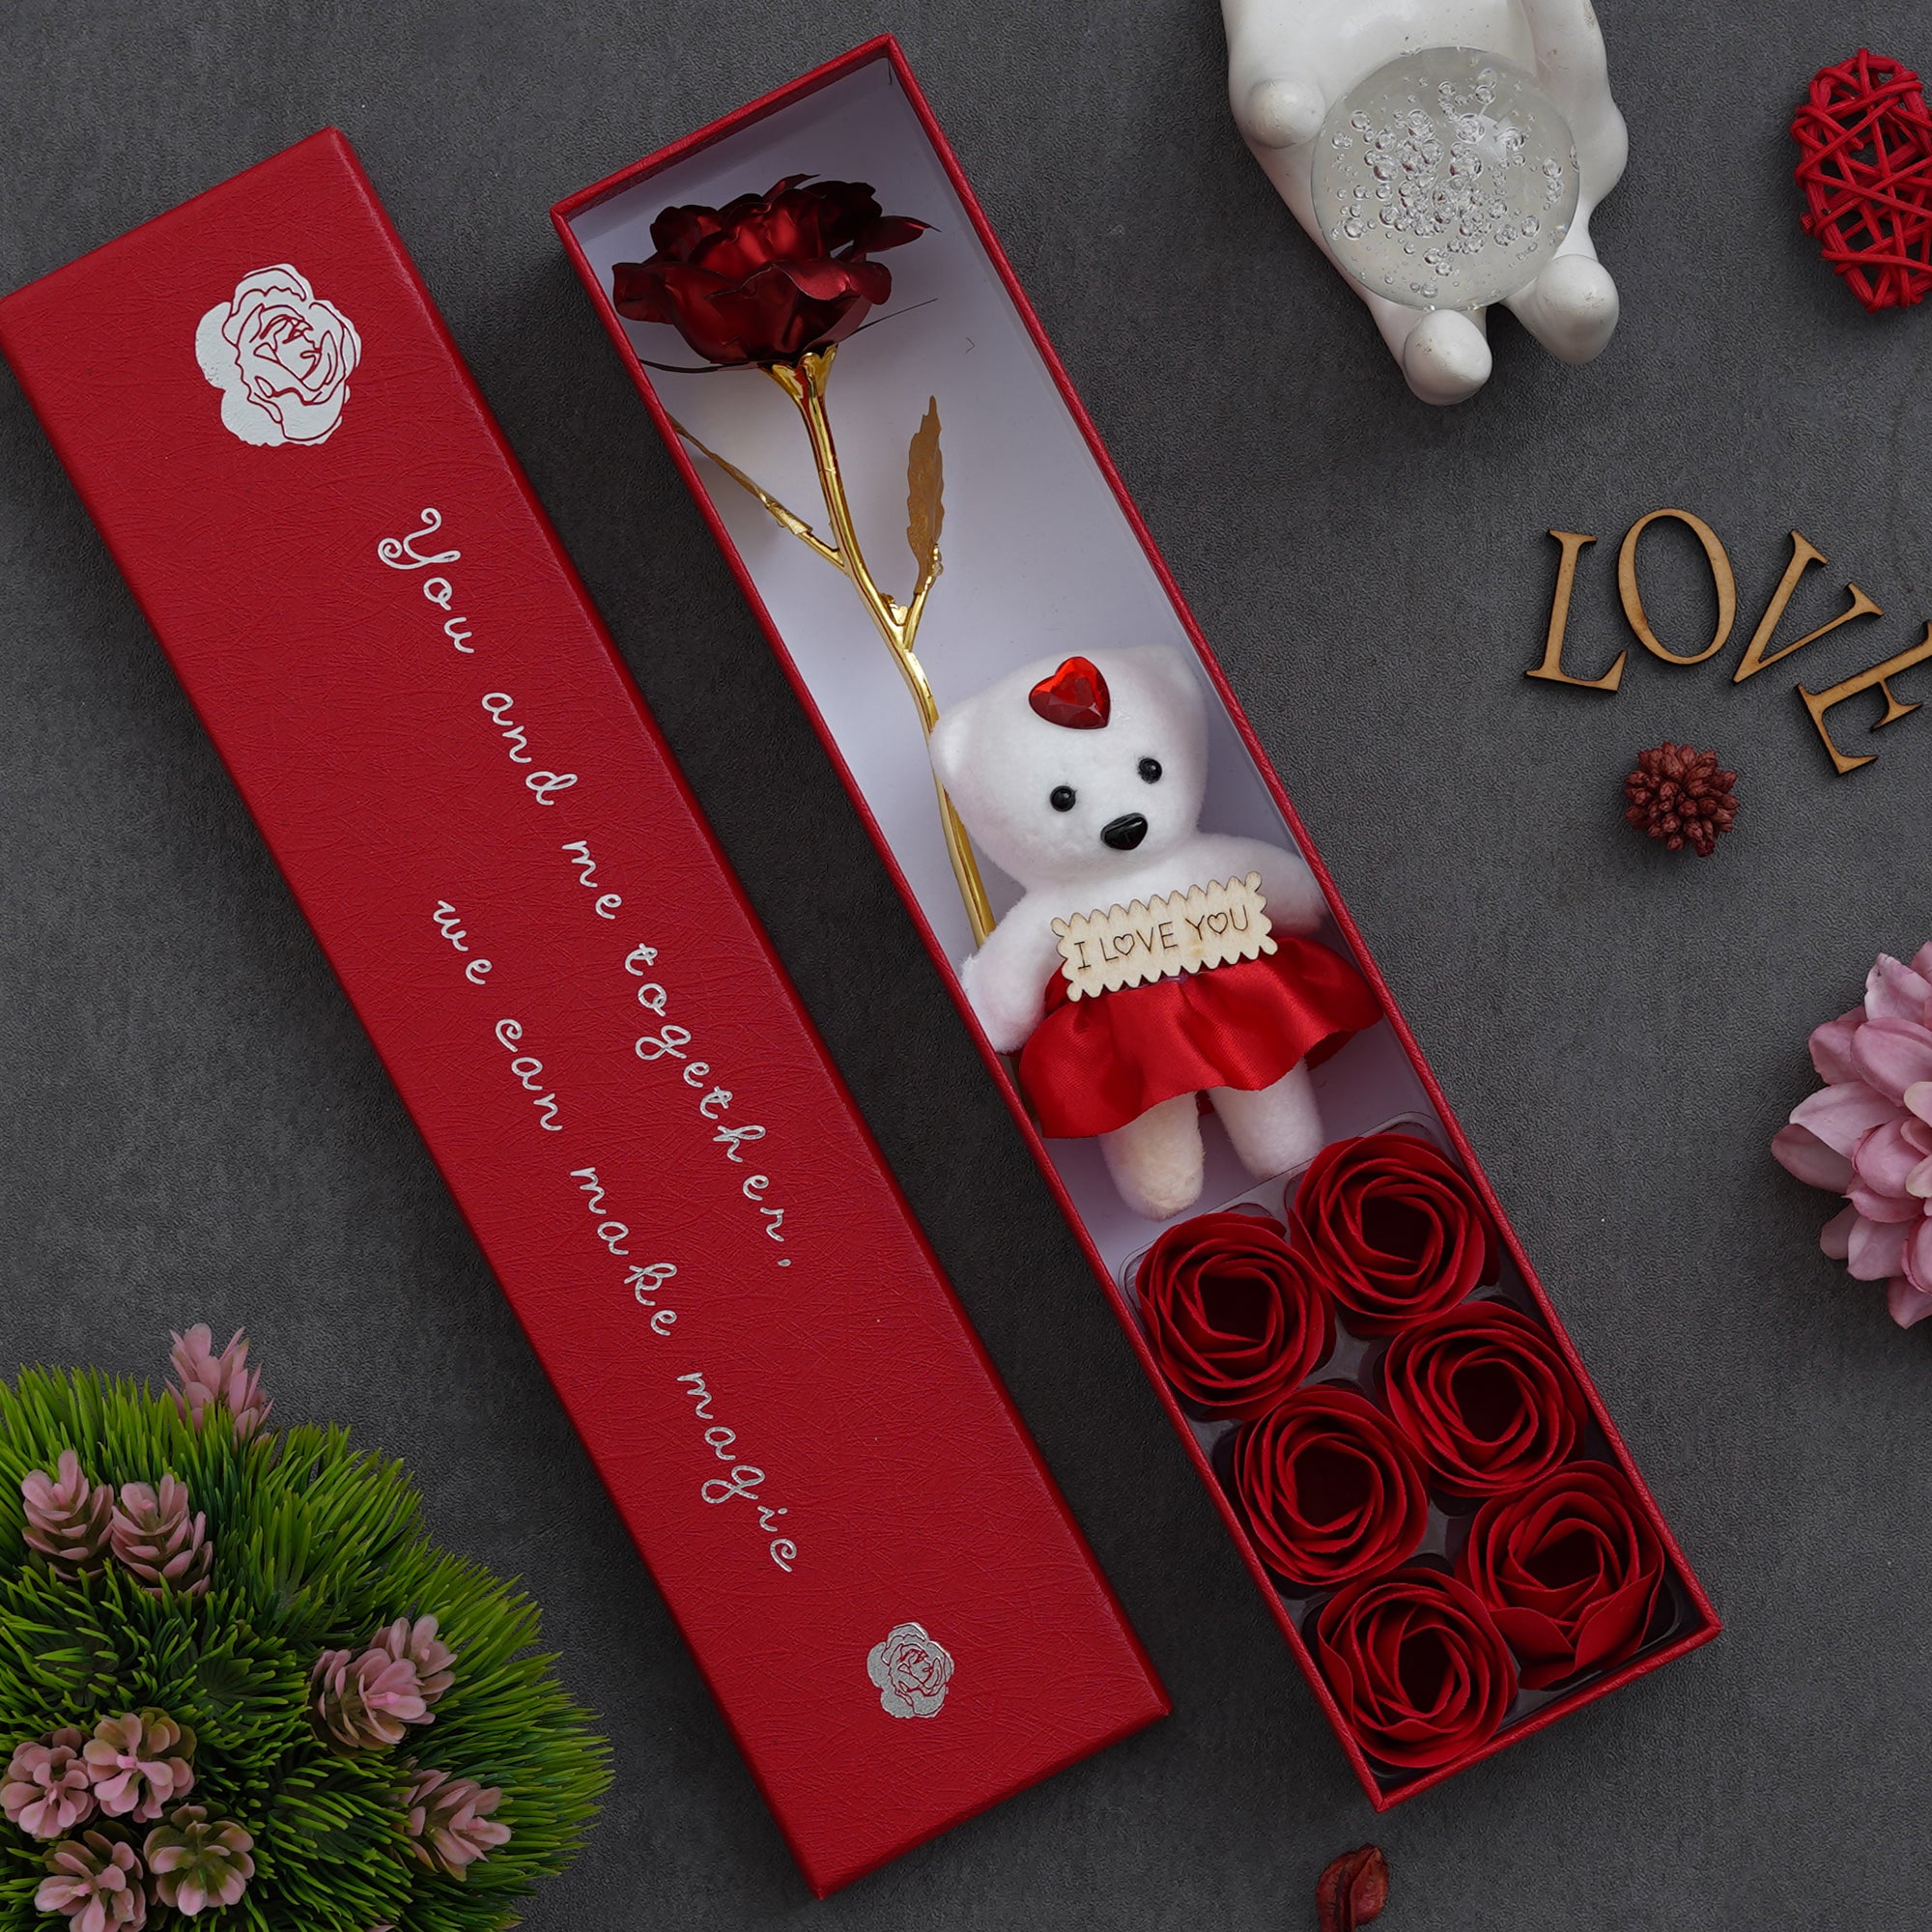 Valentine Combo of Pack of 8 Love Gift Cards, Red Gift Box with Teddy & Roses, "20 Reasons Why I Love You" Printed on Little Red Hearts Decorative Wooden Gift Set Box 3